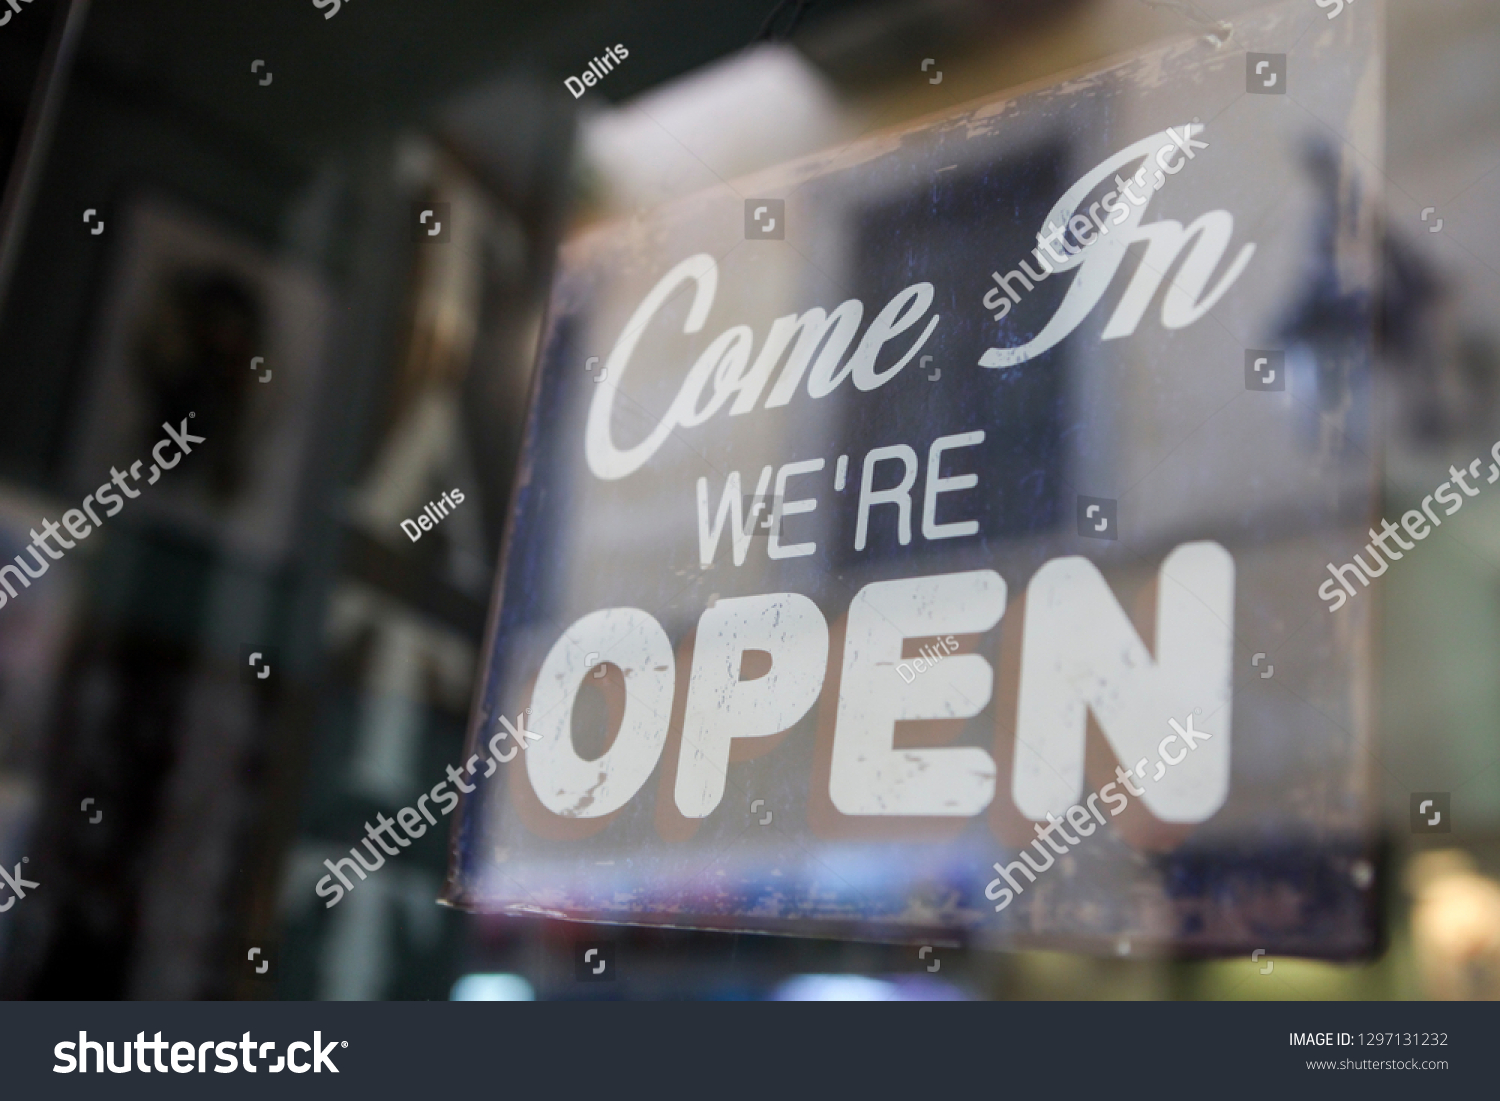 "Come in we are open" sign board through the glass of store window.  #1297131232